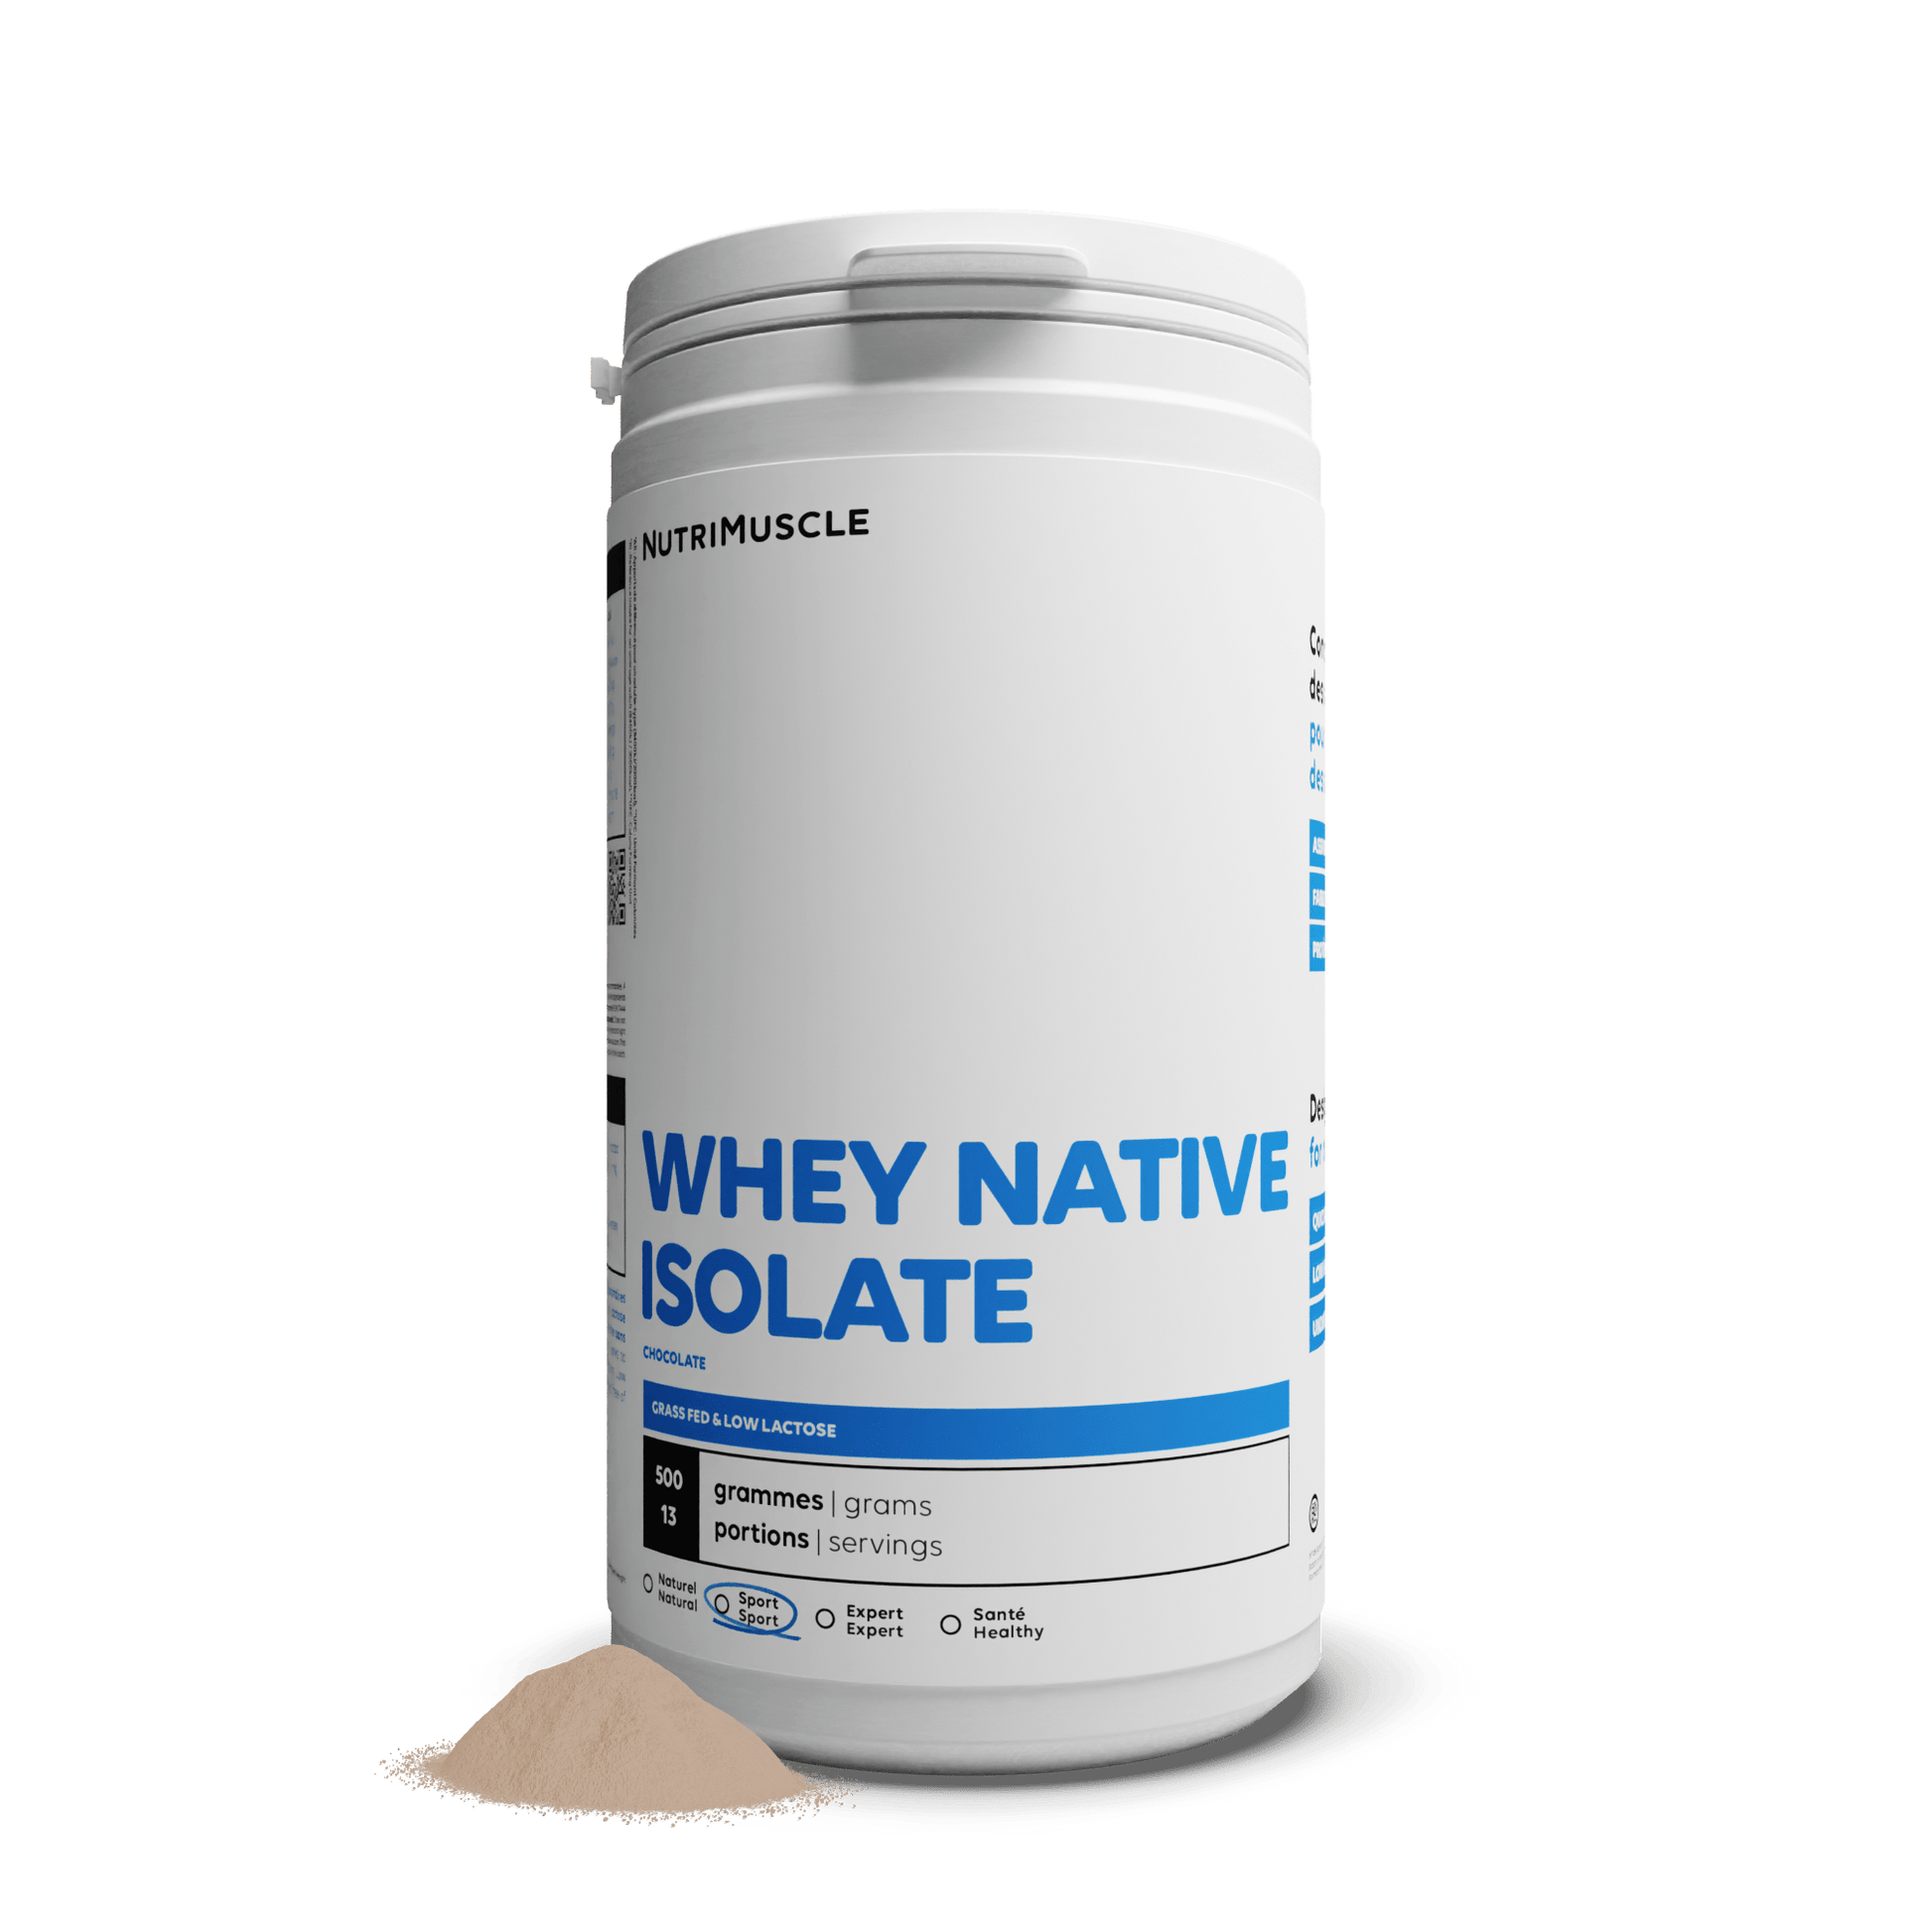 Nutrimuscle Protéines Chocolat / 500 g Whey Native Isolate (Low lactose)